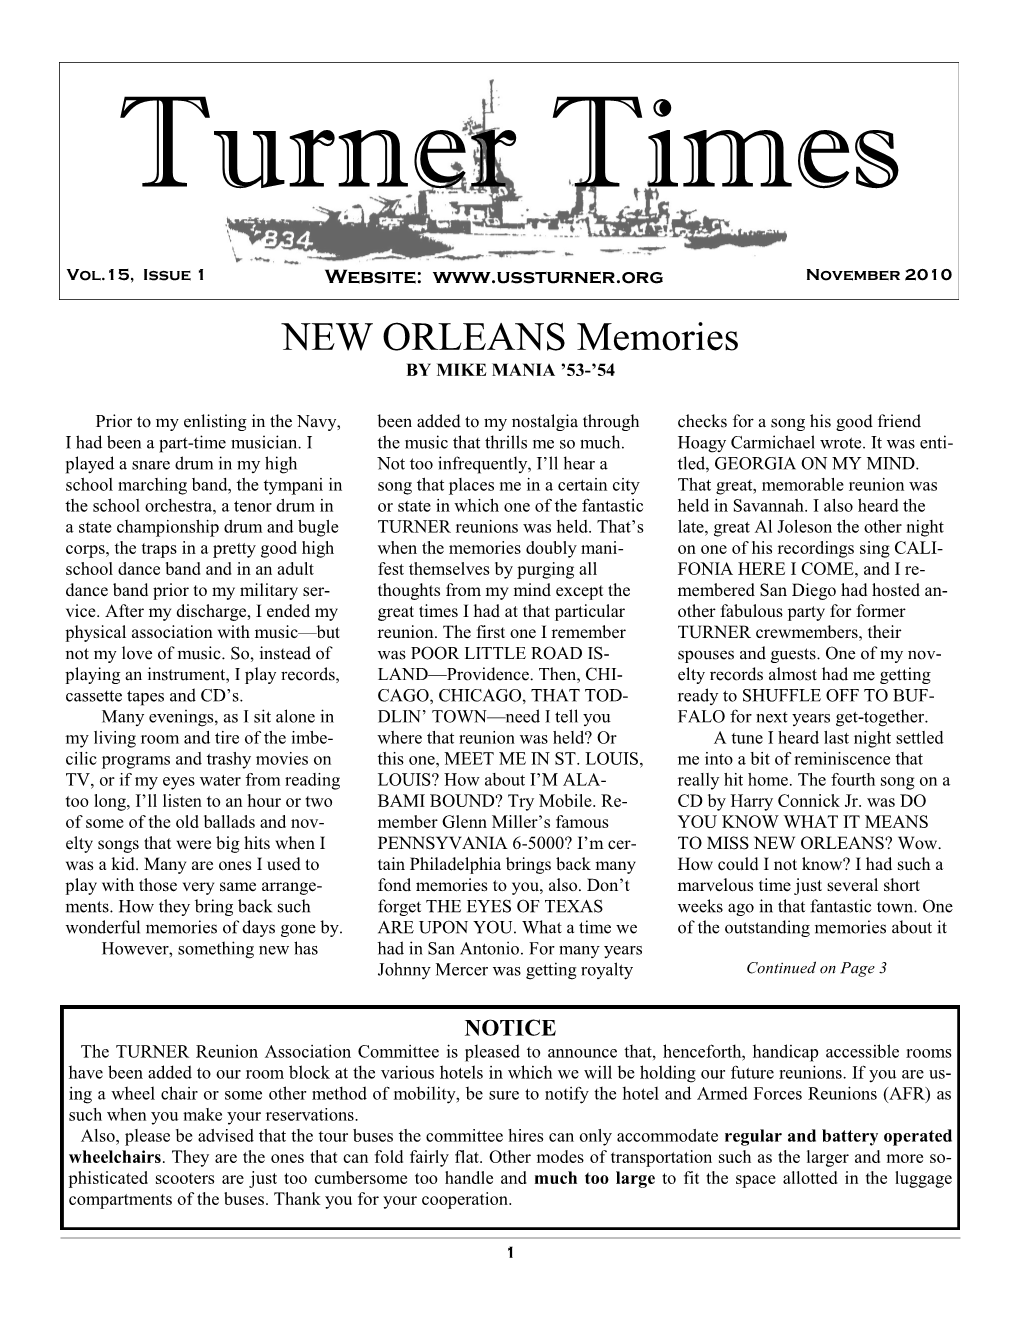 NEW ORLEANS Memories by MIKE MANIA ’53-’54